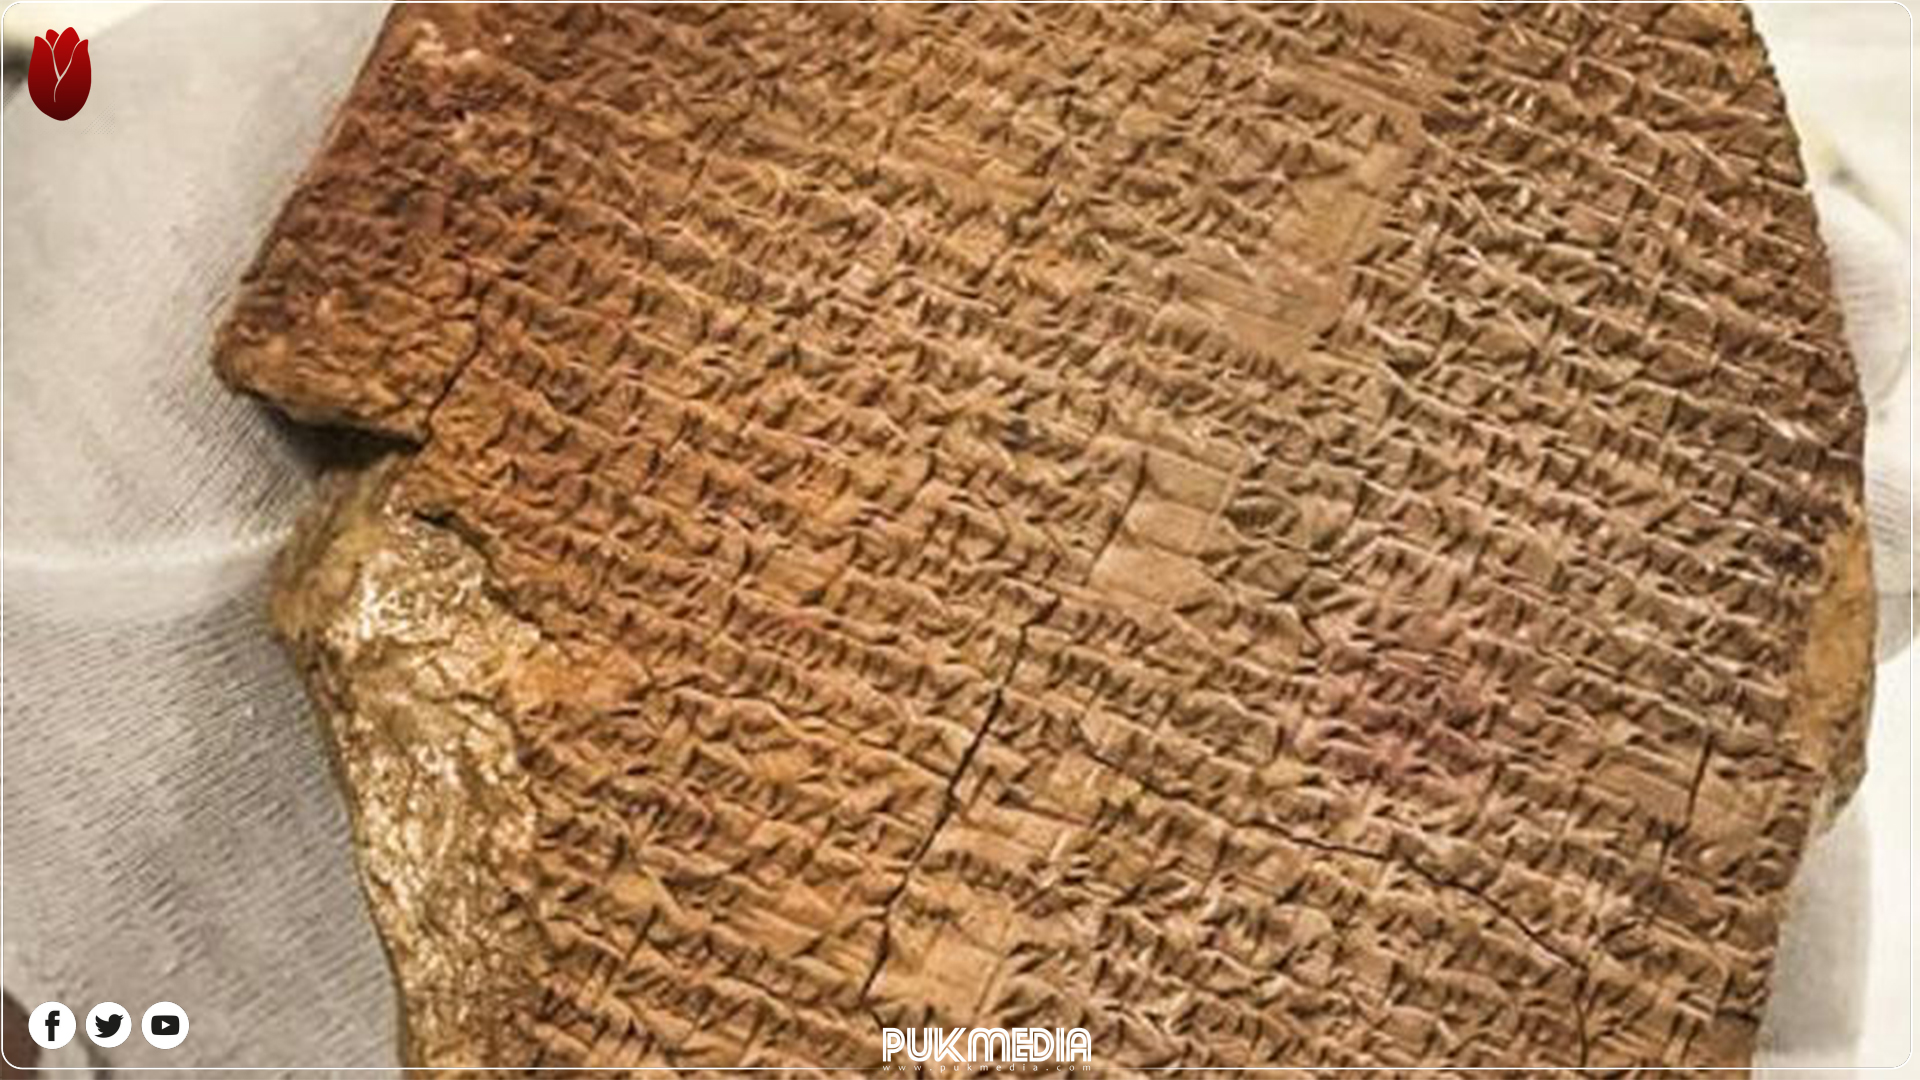 A portion of the Epic of Gilgamesh that was looted from Iraq. AP file photo